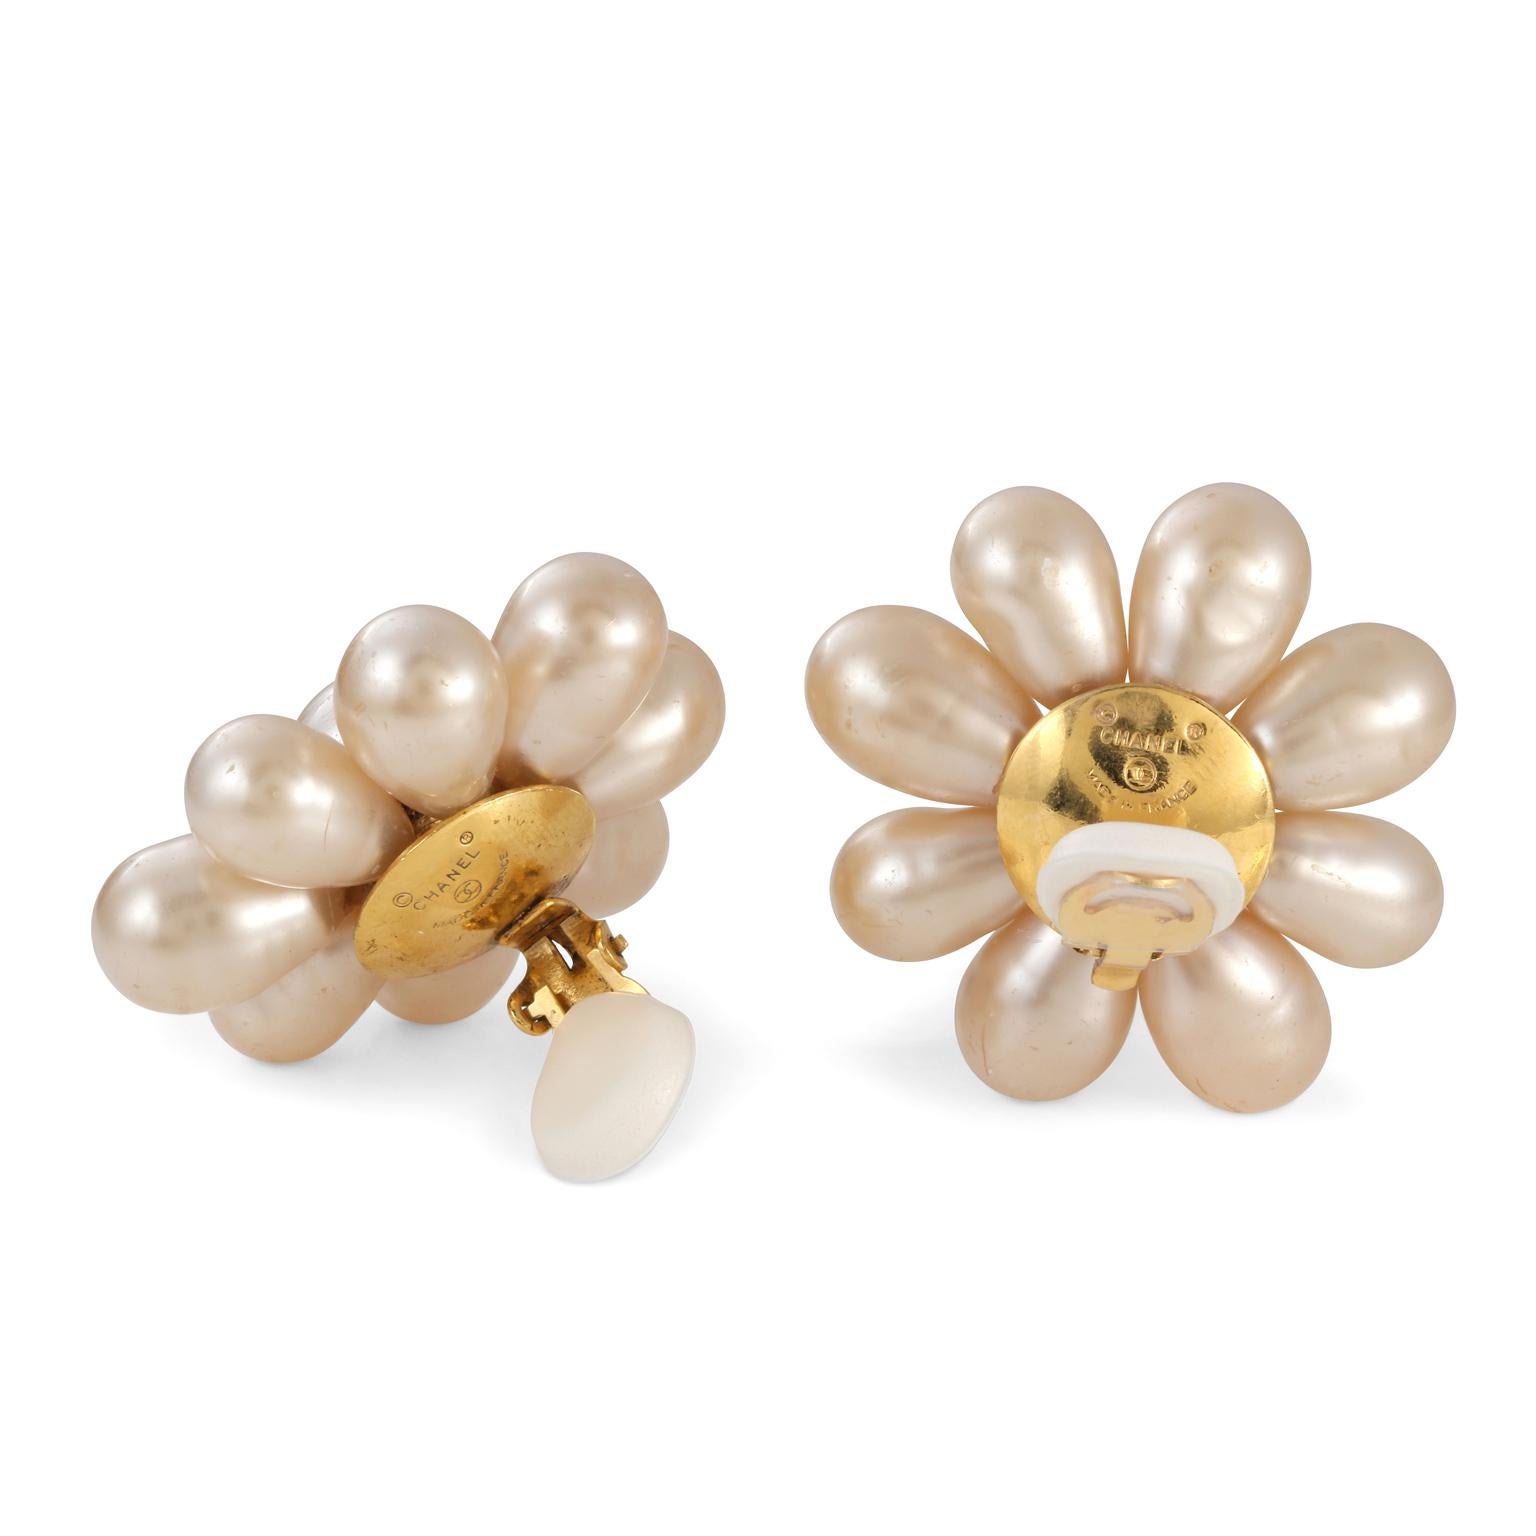 Chanel Pearl Flower Earrings In Good Condition For Sale In Palm Beach, FL